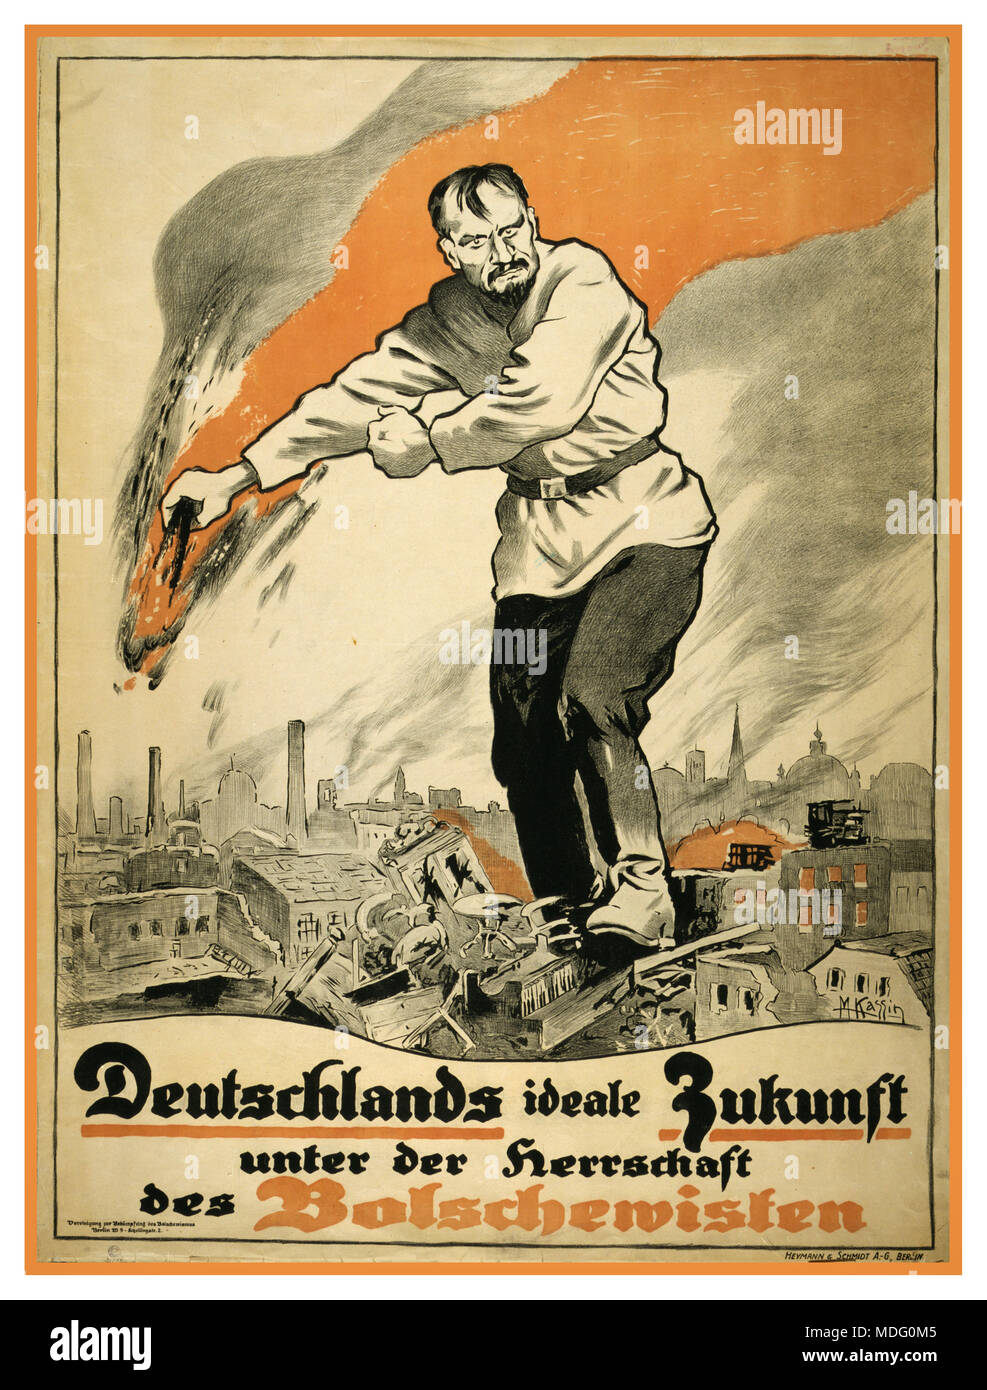 1919 German anti Bolshevik vintage historic old Bolshevism propaganda poster shows a gigantic Russian man standing on the burning ruins of a city.  'Germany's ideal future under the leadership of the Bolsheviks' Stock Photo